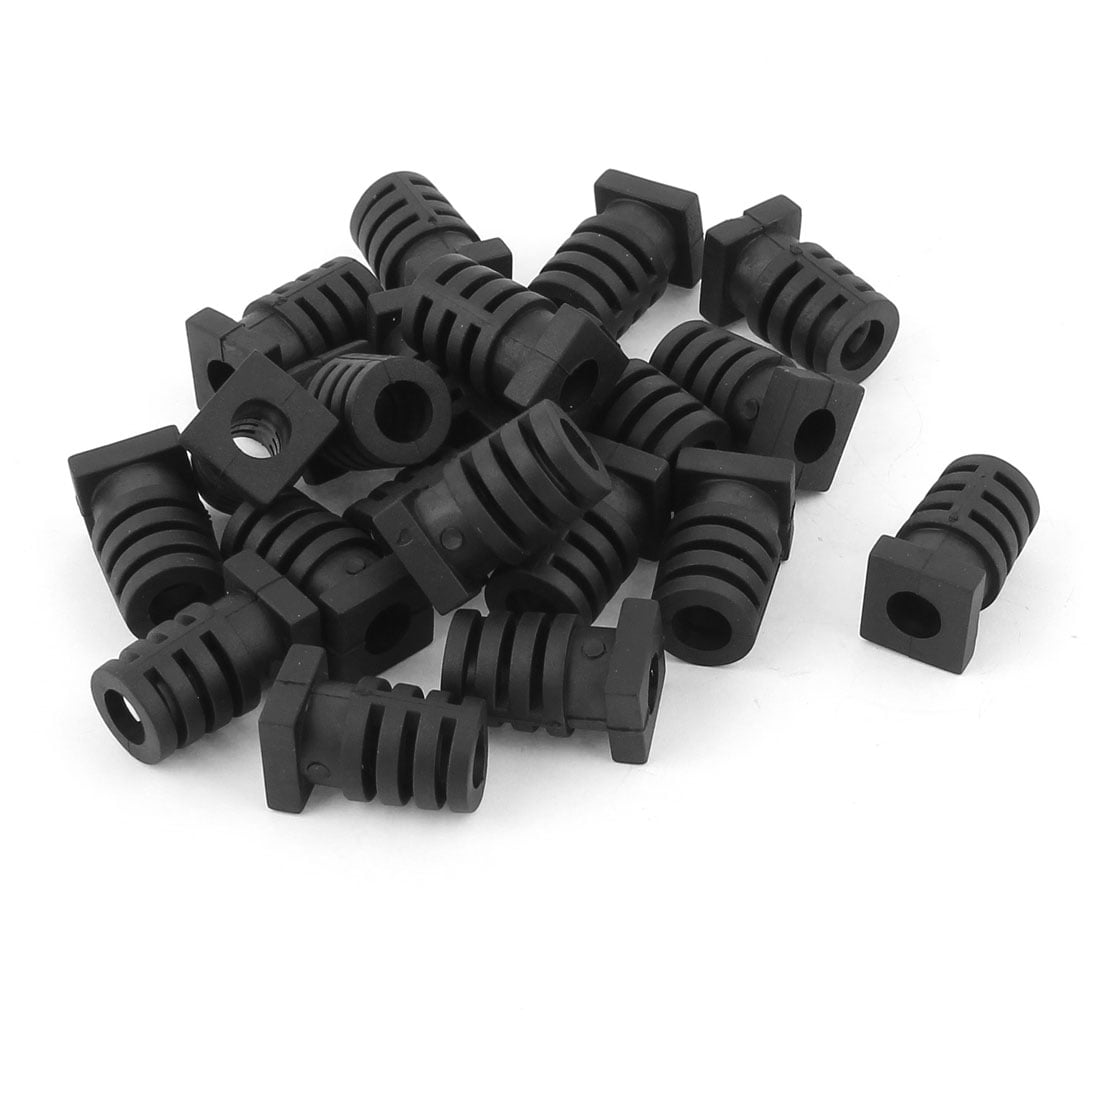 uxcell 15 Pcs Rubber Strain Relief Cord Boot Guard Wire Cable Sleeve Hose 27mm x 7mm a16051100ux0205 